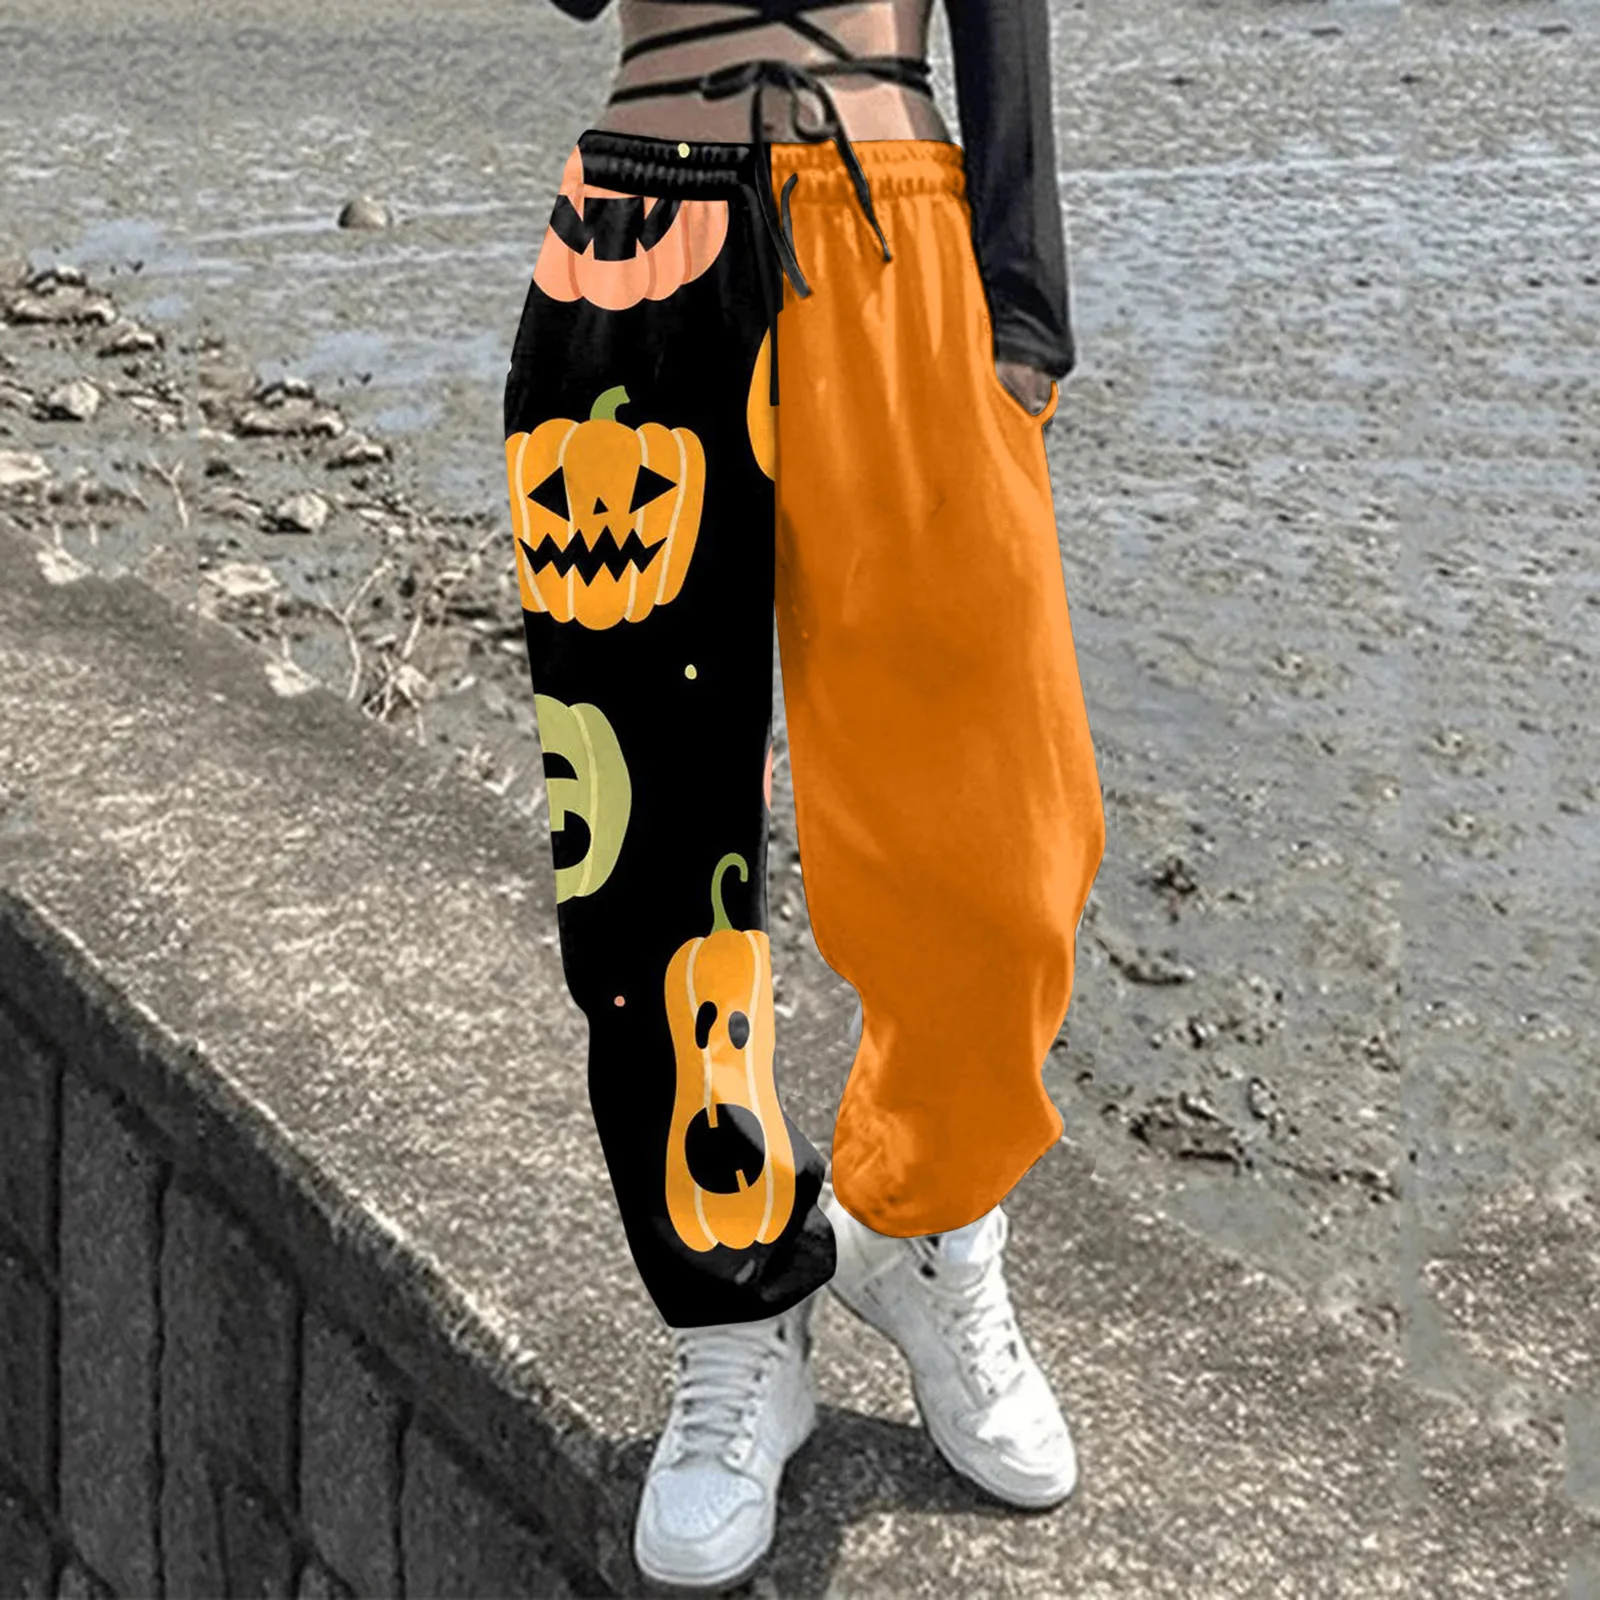 2023 Halloween Women's Pants 3D Printing Casual Harlan Pants Versatile Straight Leg Pants Fashion Knee Length Pants Sports Pants men s stockings sexy over the knee blue striped football sports socks boy student middle stockings exotic apparel mans underwear